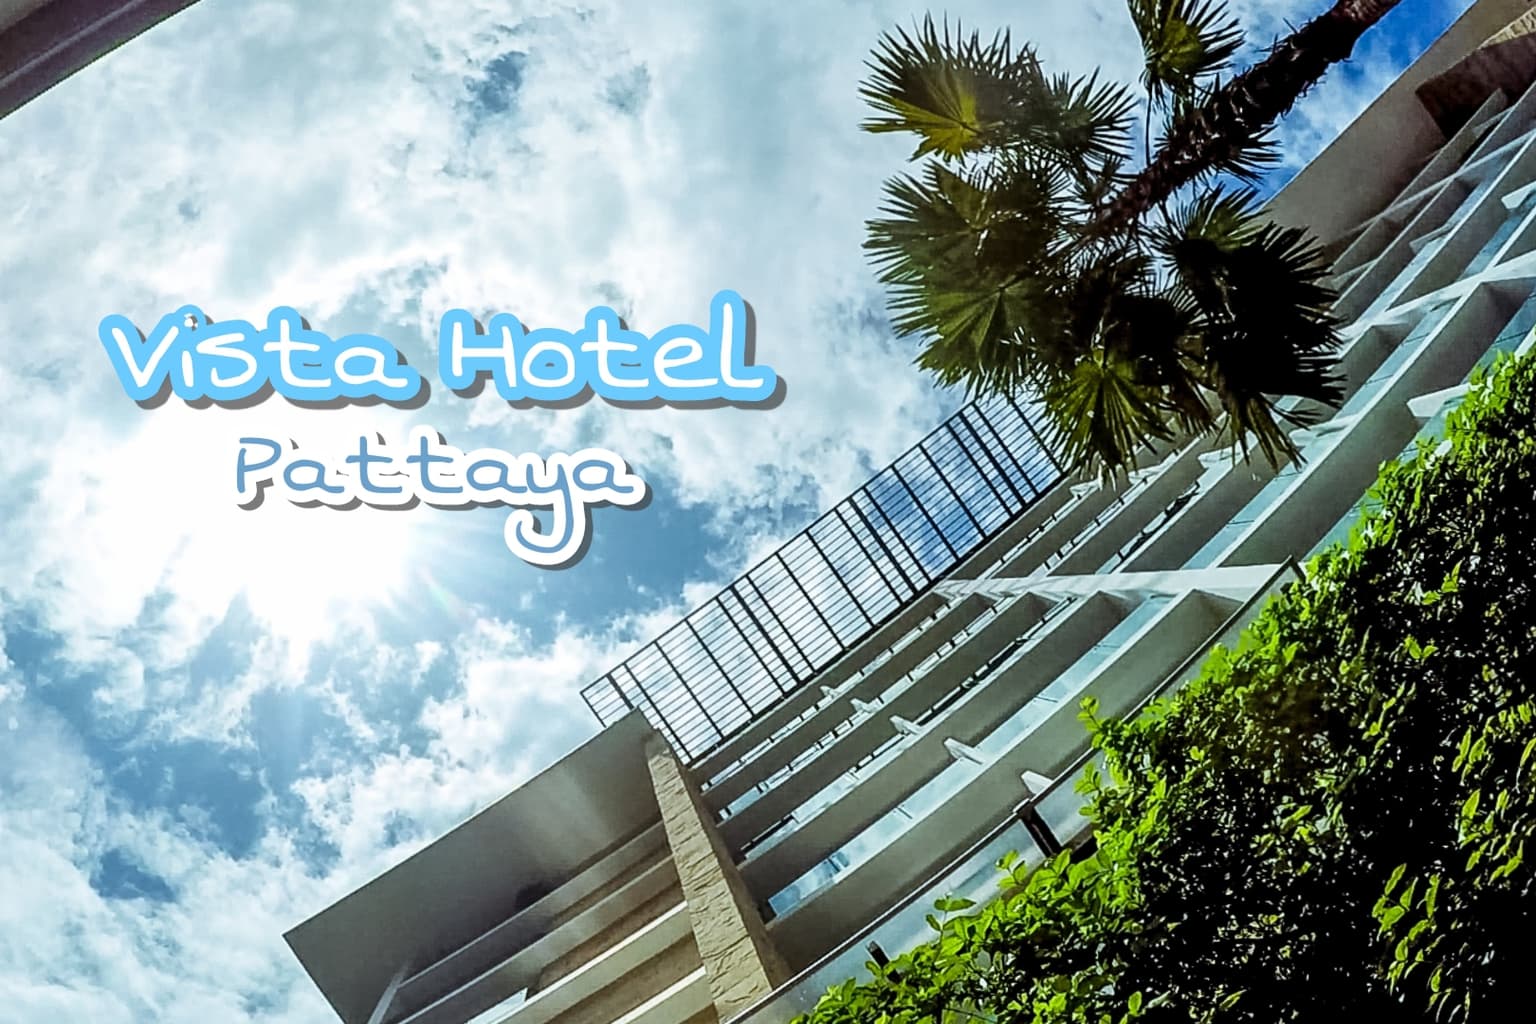 Vista Hotel Pattaya | Are you looking for hotel in Pattaya?